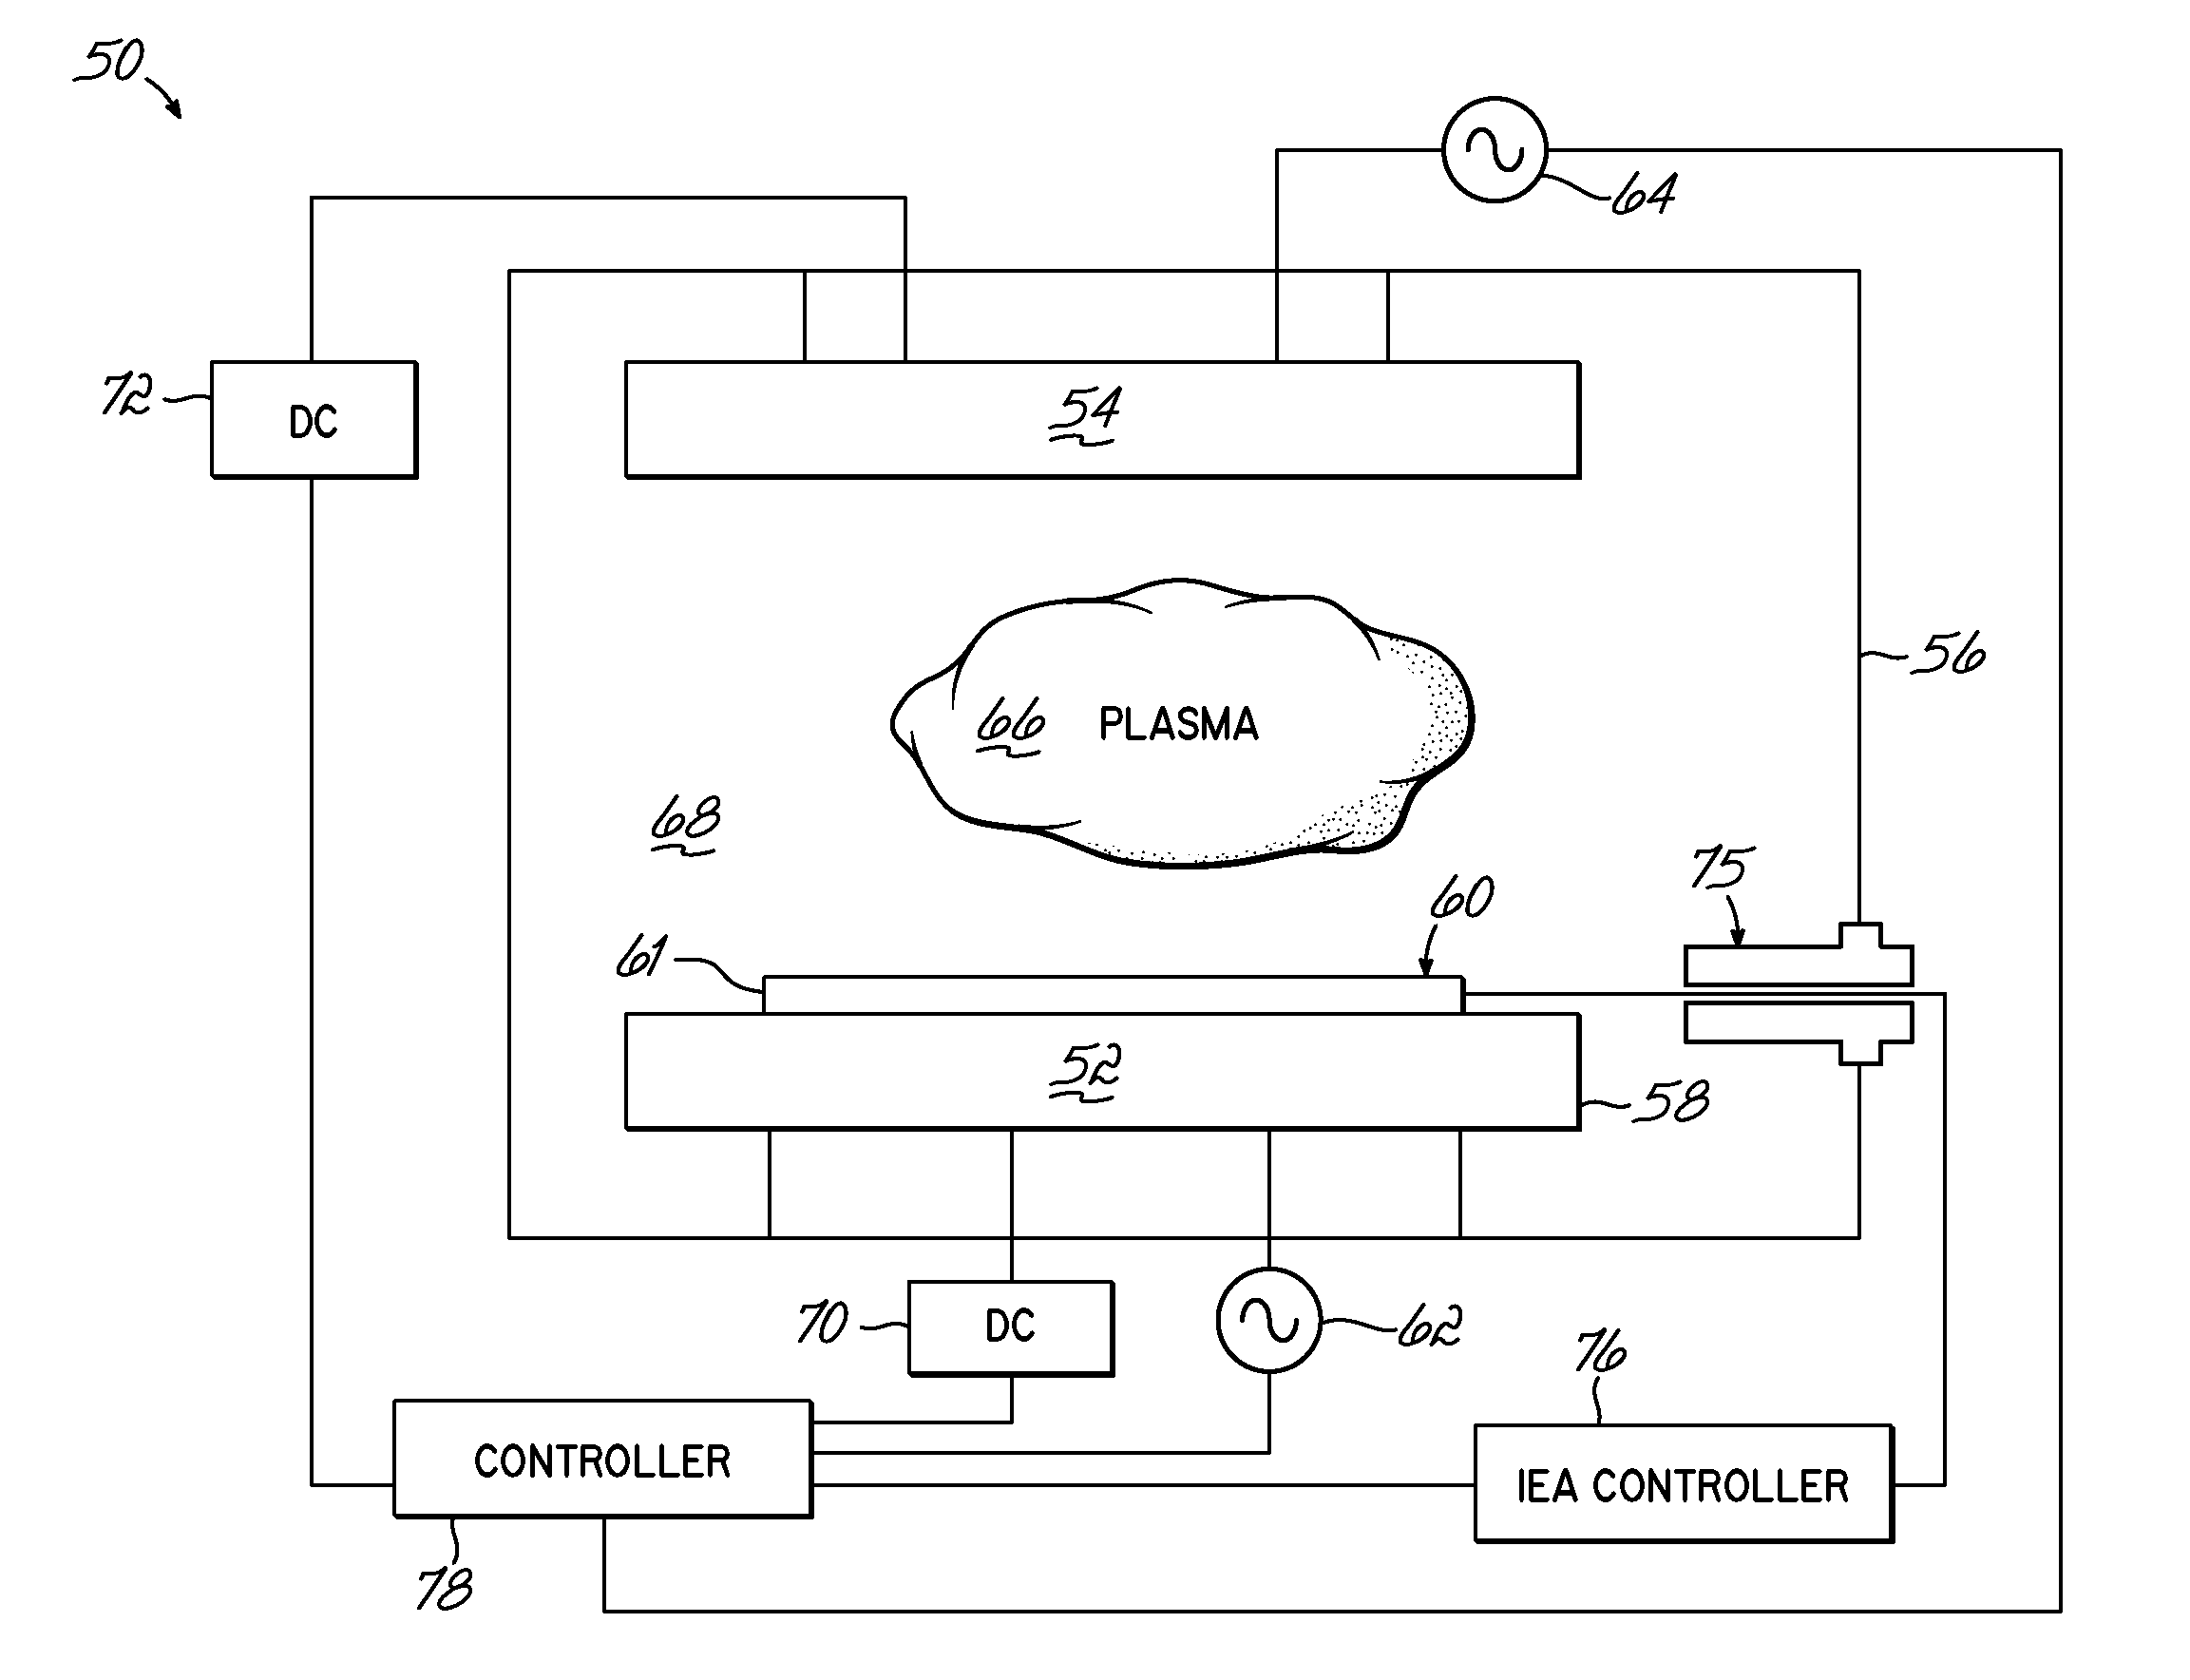 Methods of electrical signaling in an ion energy analyzer